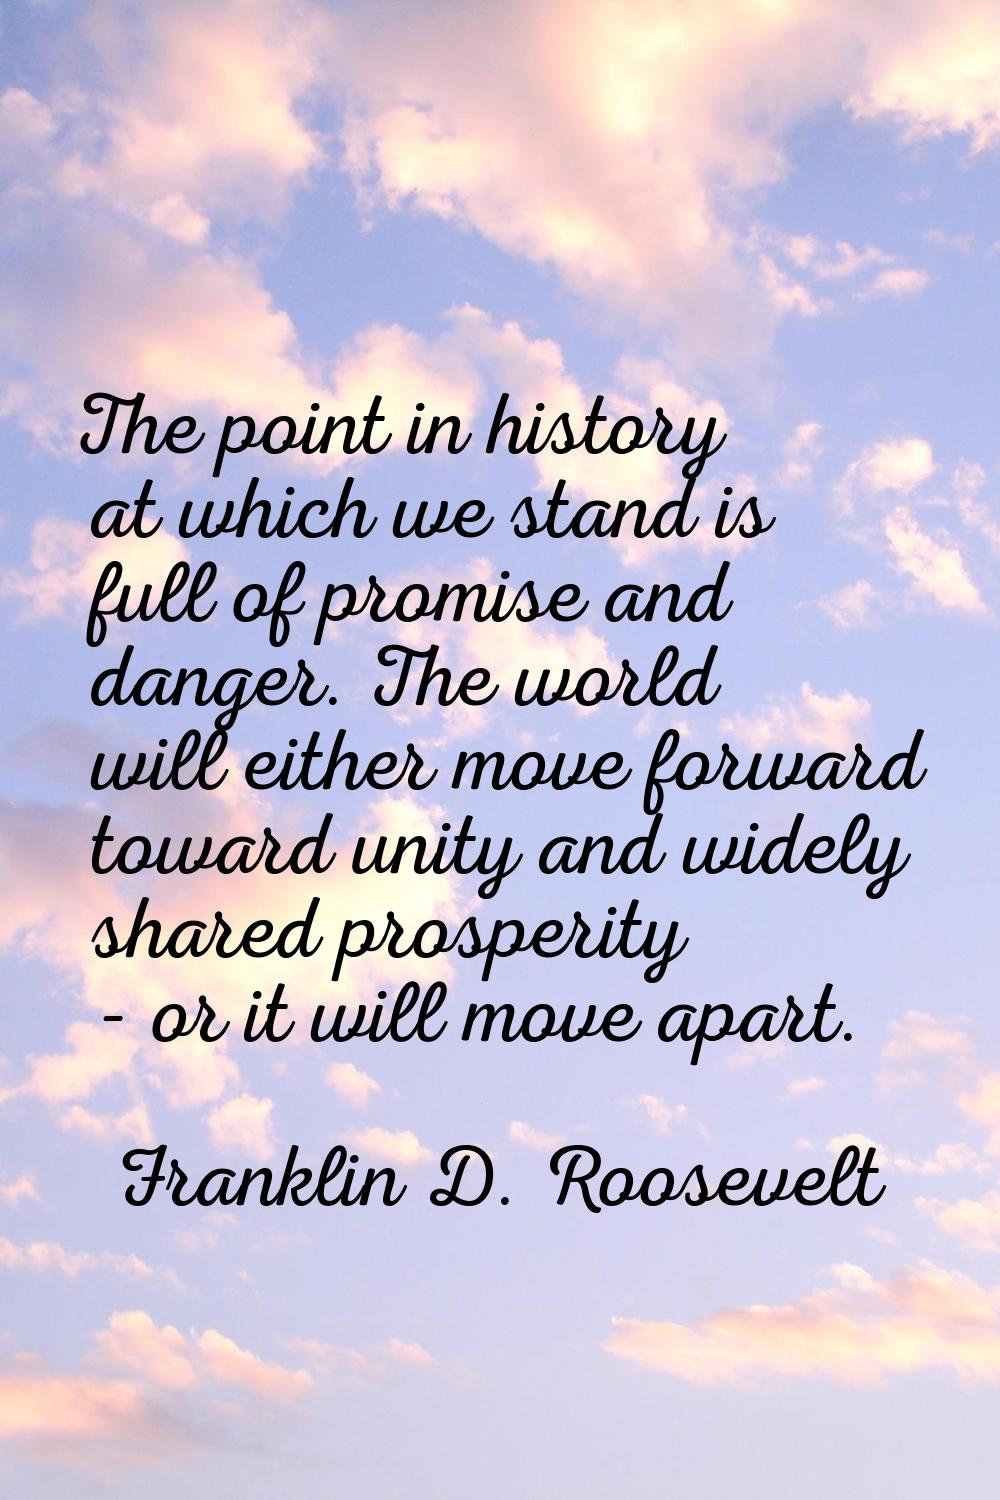 The point in history at which we stand is full of promise and danger. The world will either move fo